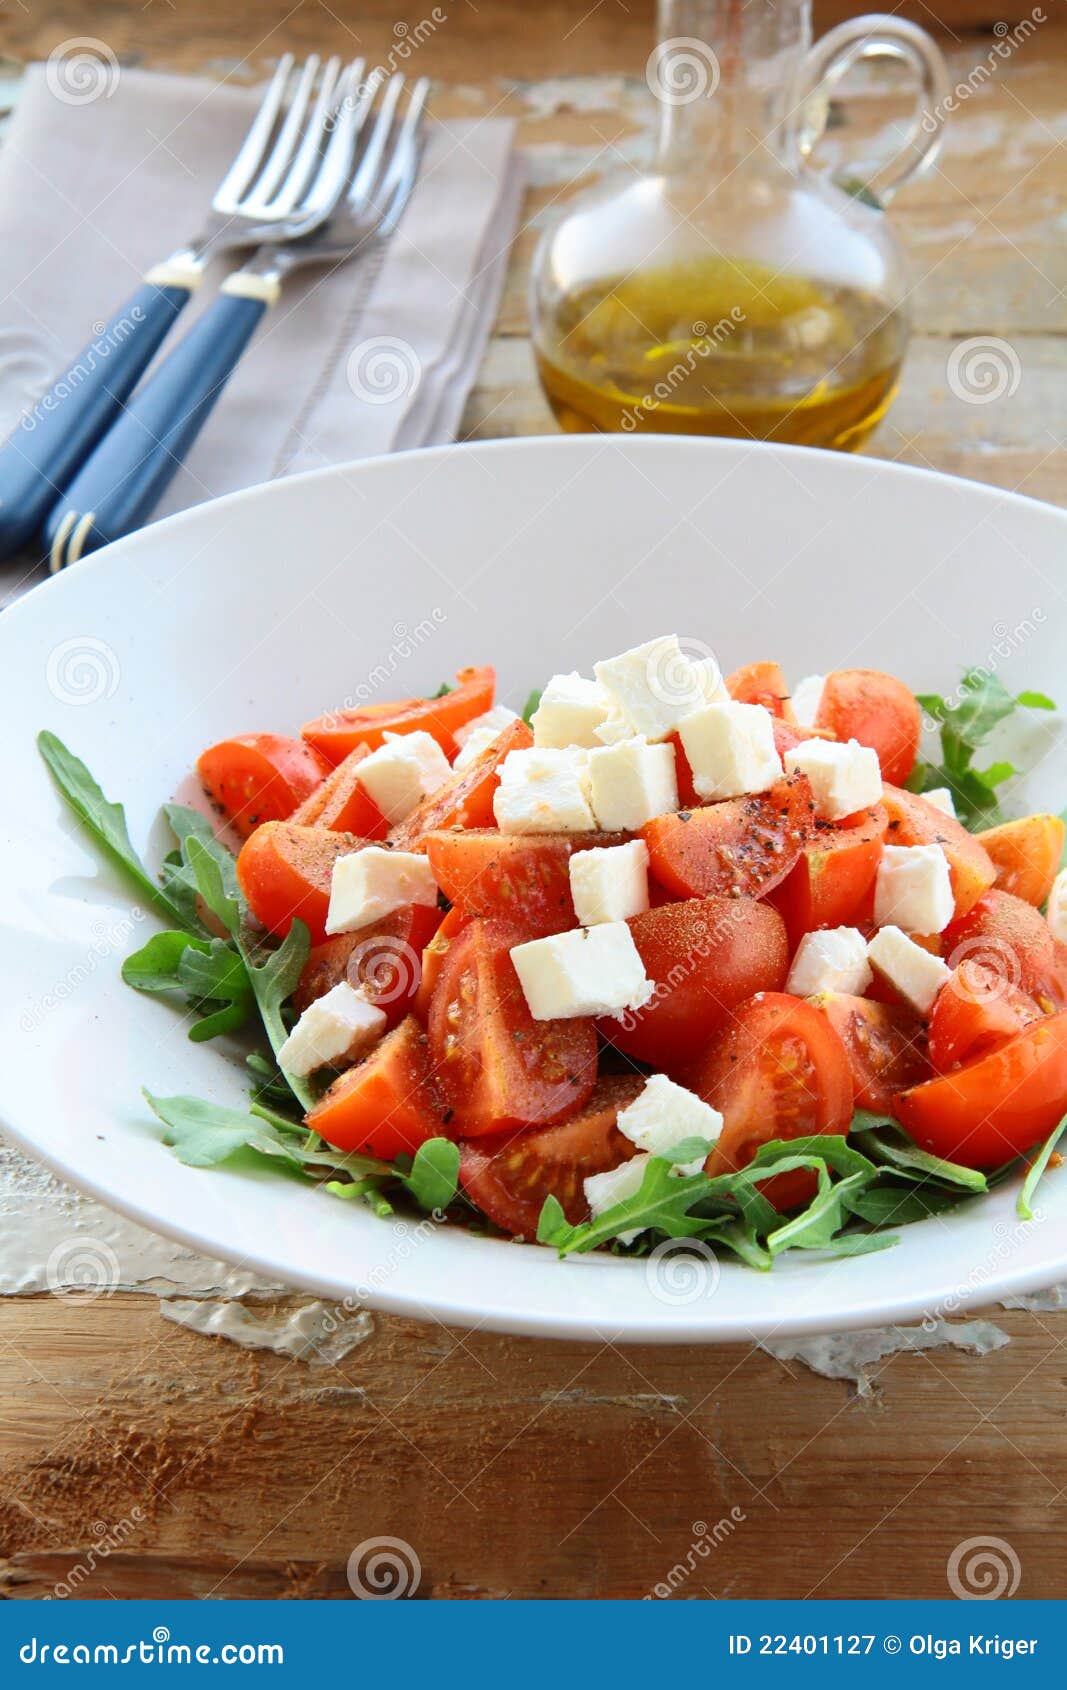 Greek Salad with Feta Cheese, Olive Stock Image - Image of foodstuff ...